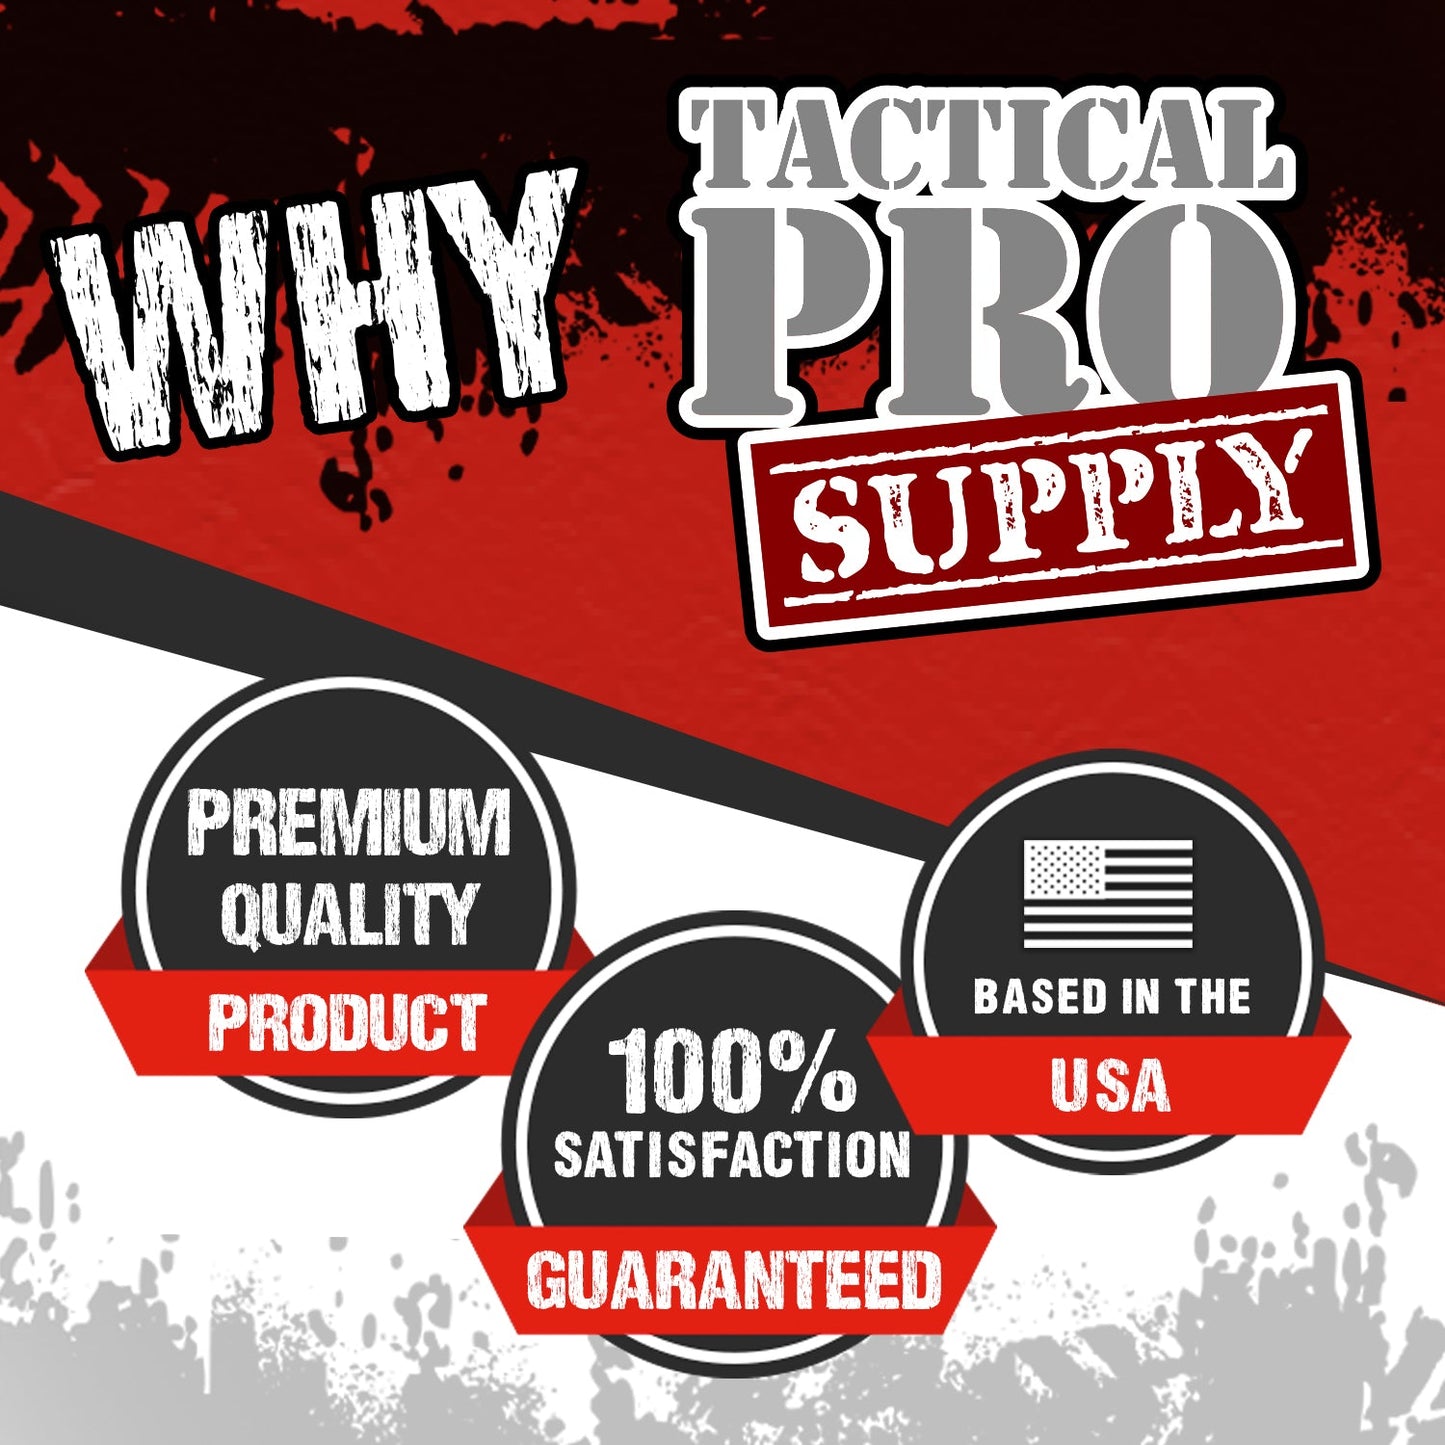 Red Line - Tactical Pro Supply, LLC